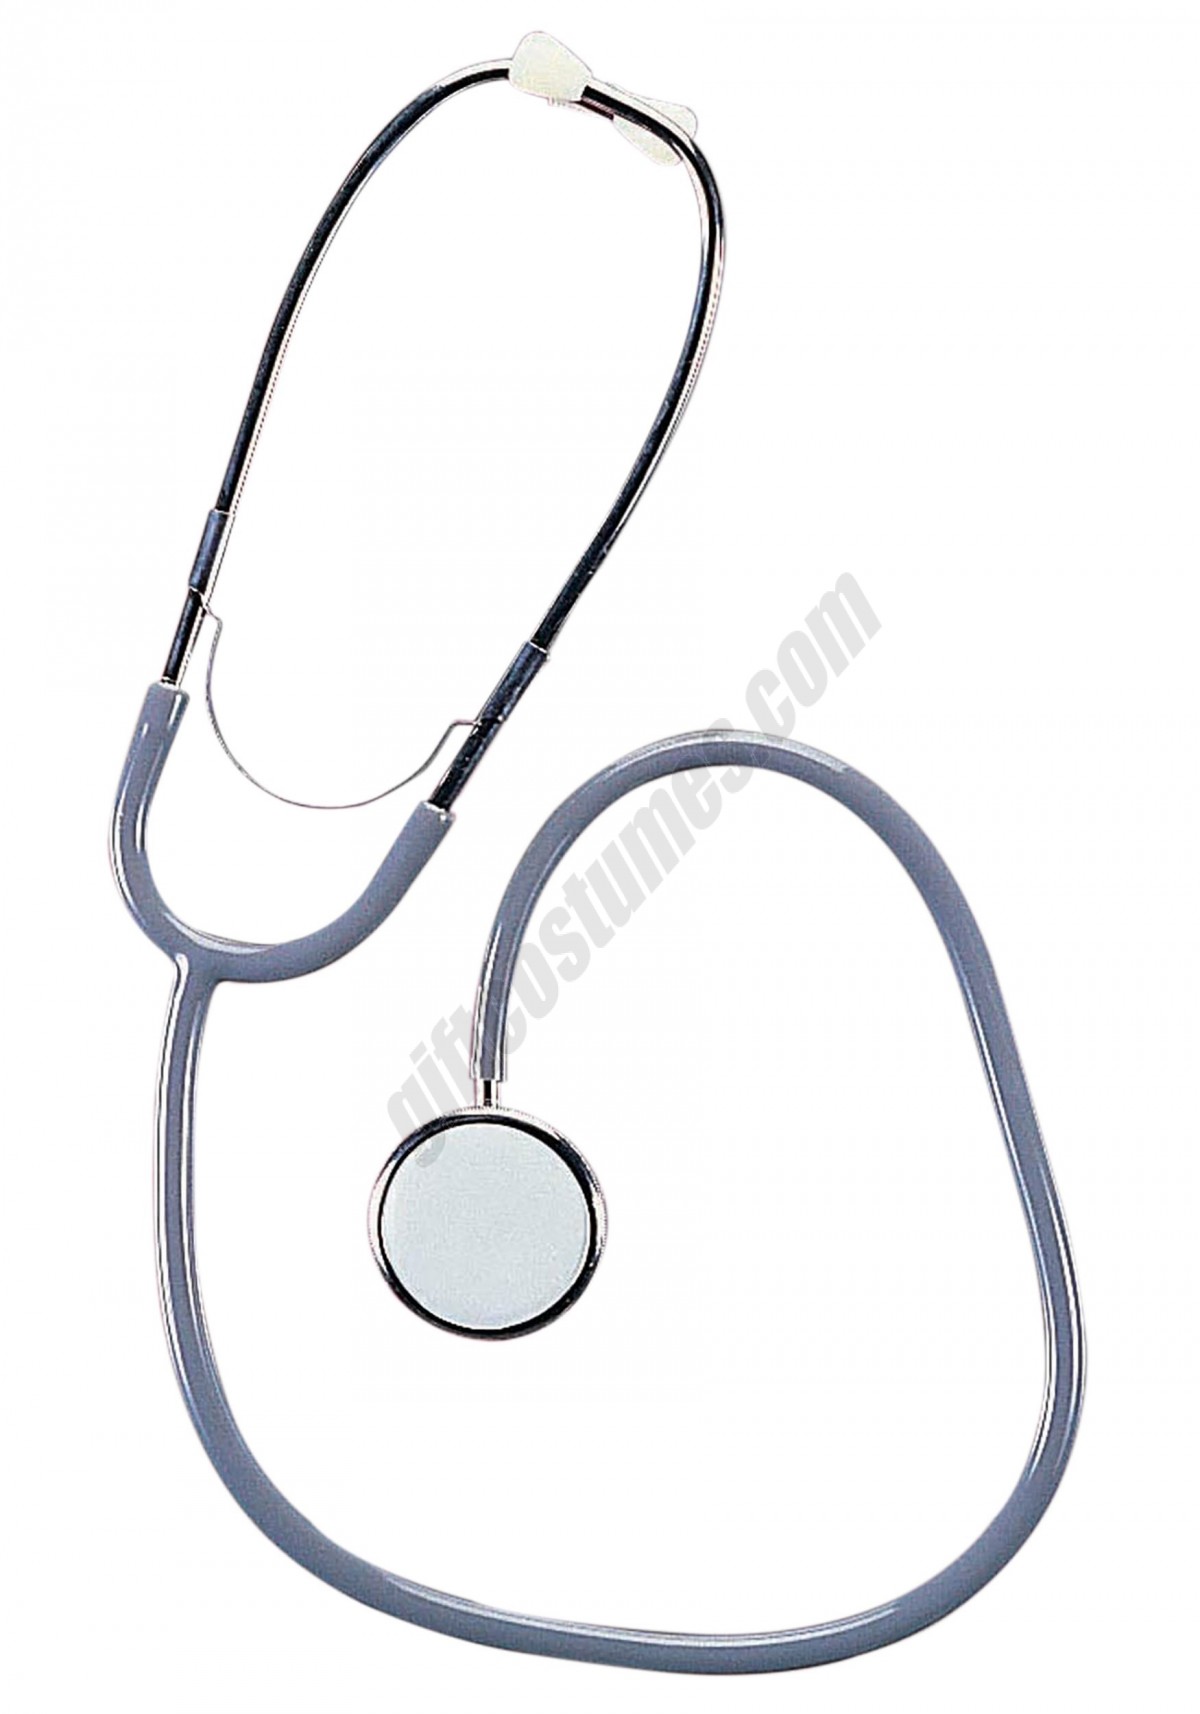 Deluxe Doctor Stethoscope Promotions - -0